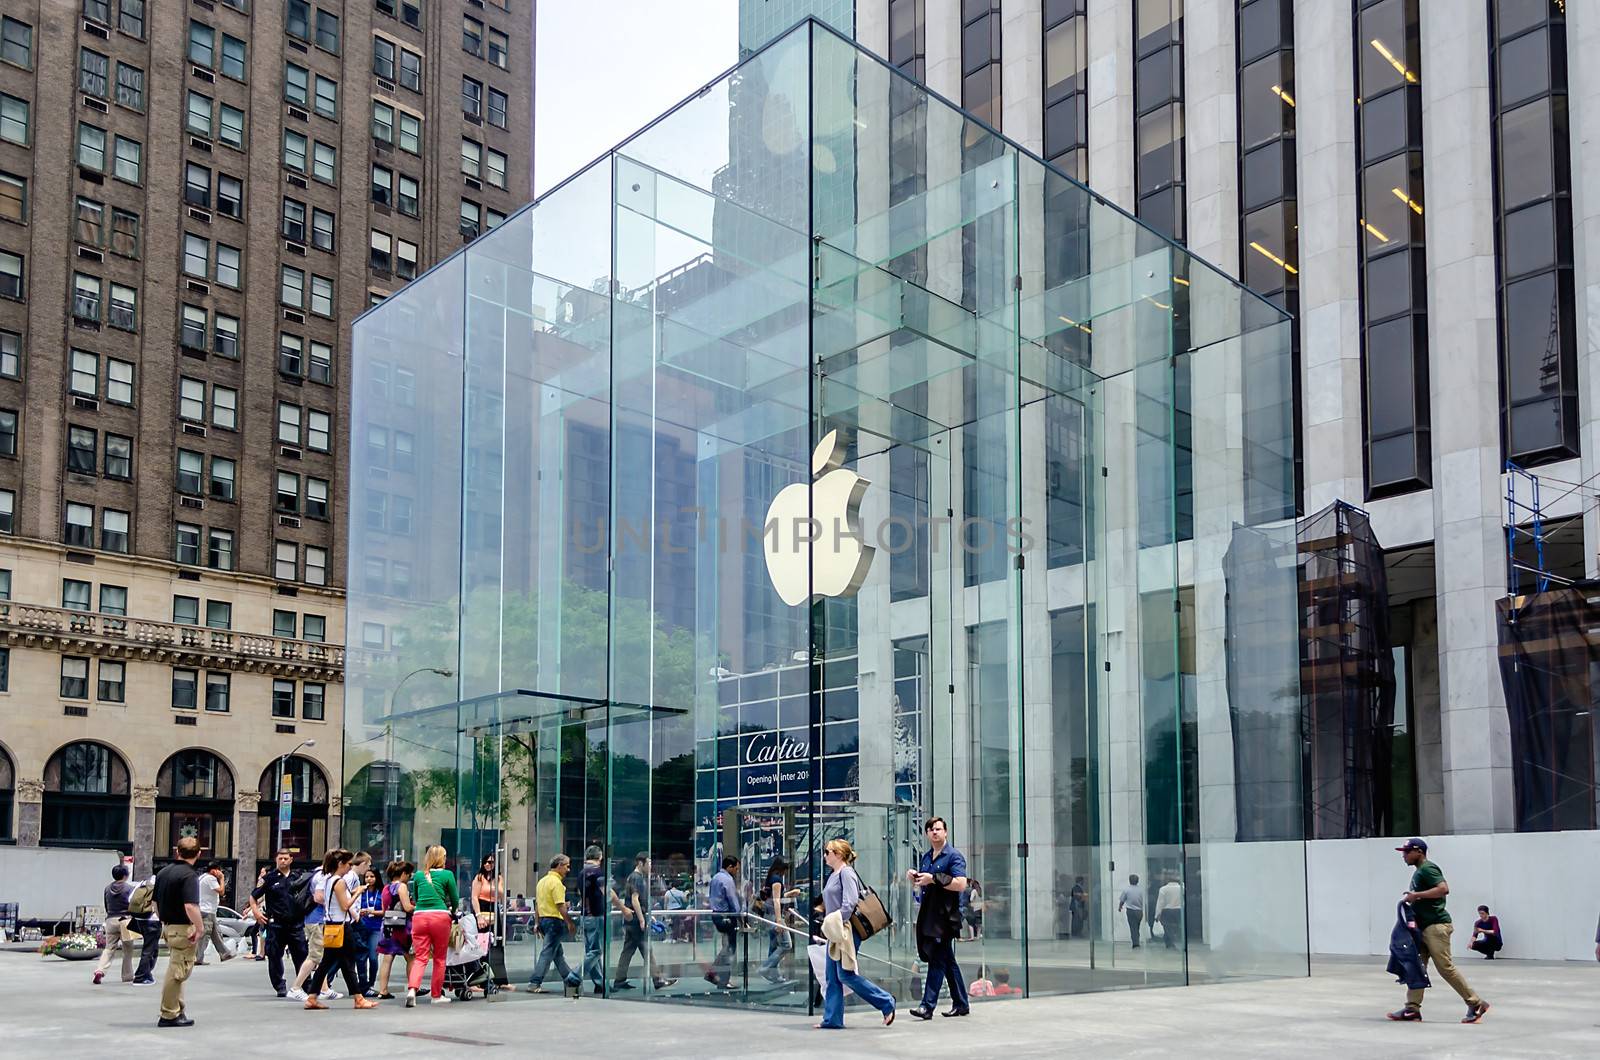 Apple Store at 5th Ave, New York City by marcorubino